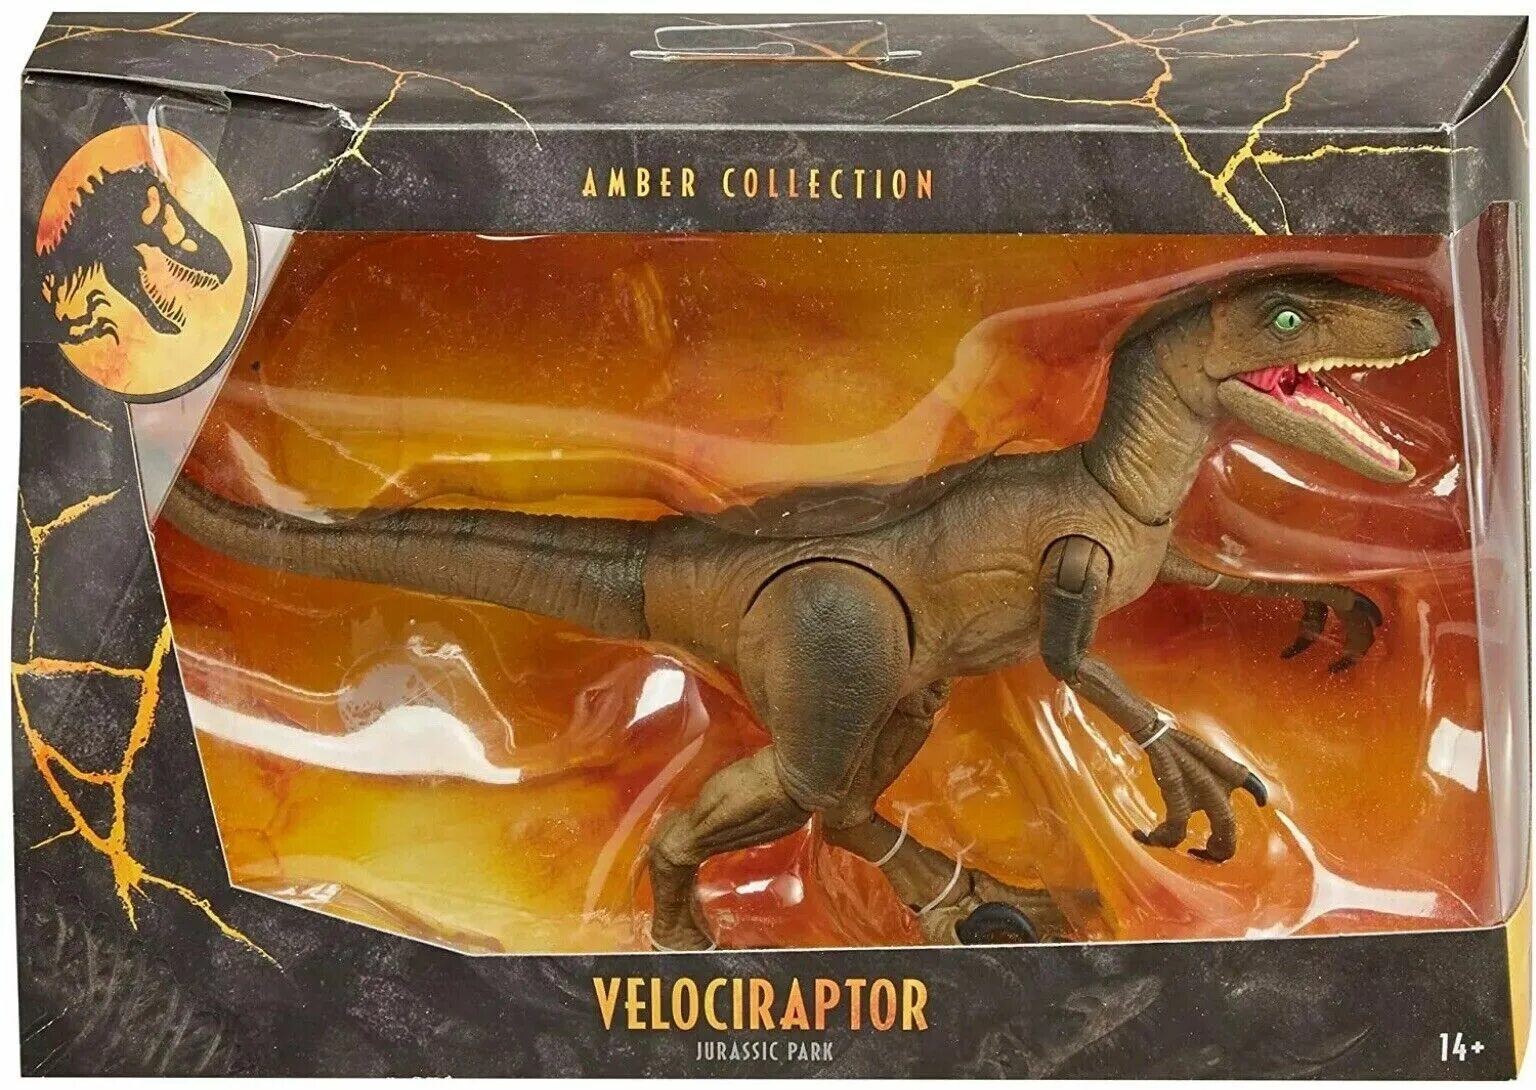 Amber collection. Велоцераптор Amber collection. Игрушки Mattel Jurassic World Велоцираптор. Игрушка Amber collection Велоцераптор Блю. Amber collection Jurassic Park Velociraptor.